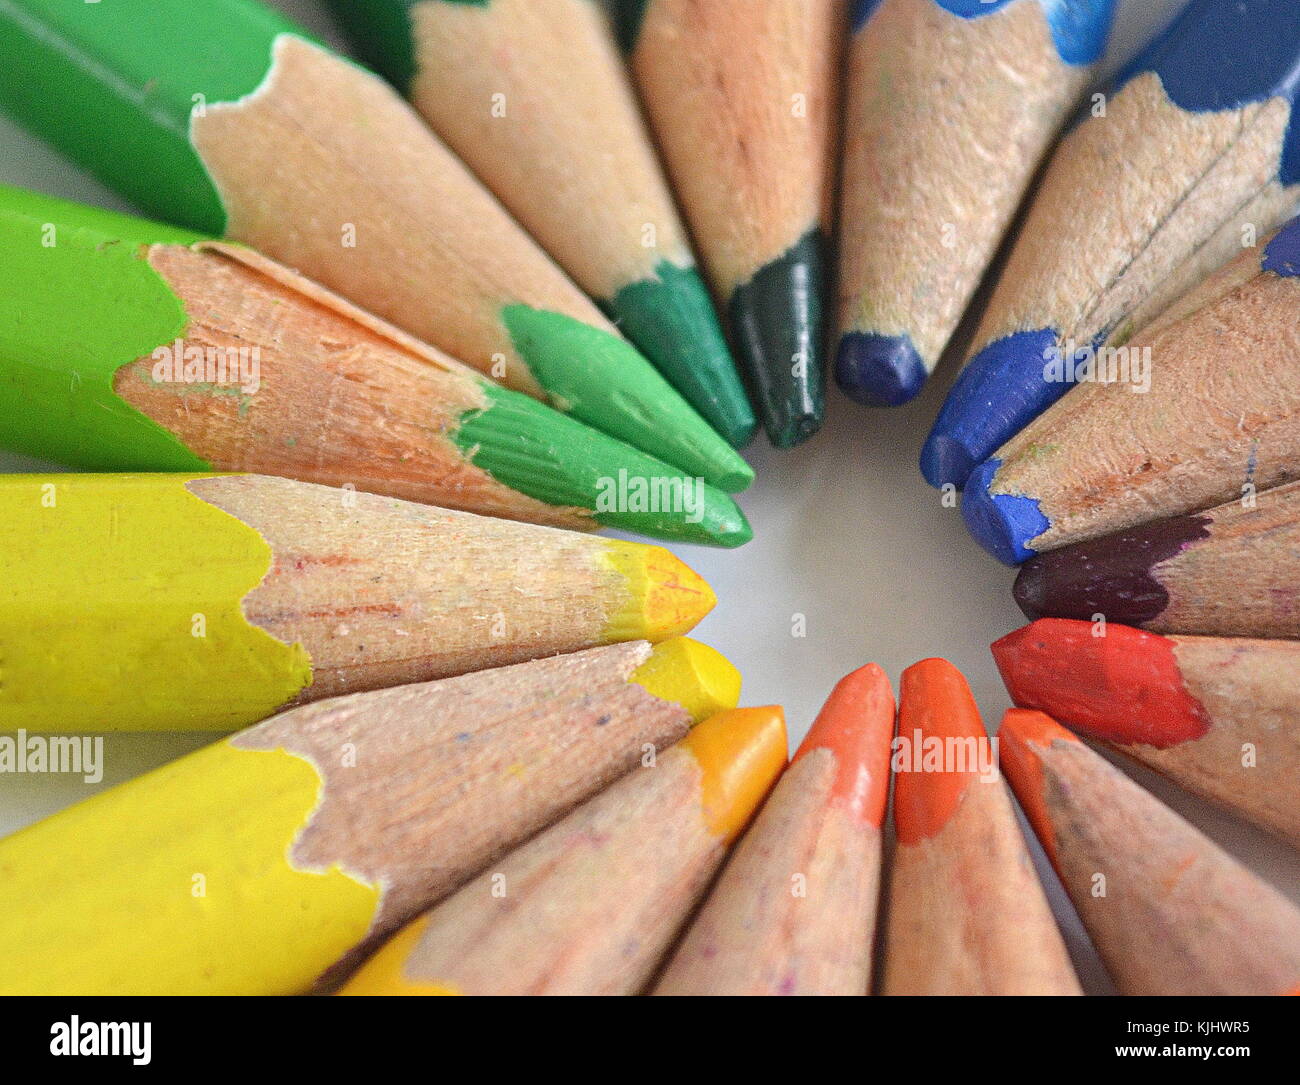 Close-up of colored pencil tips Banque D'Images